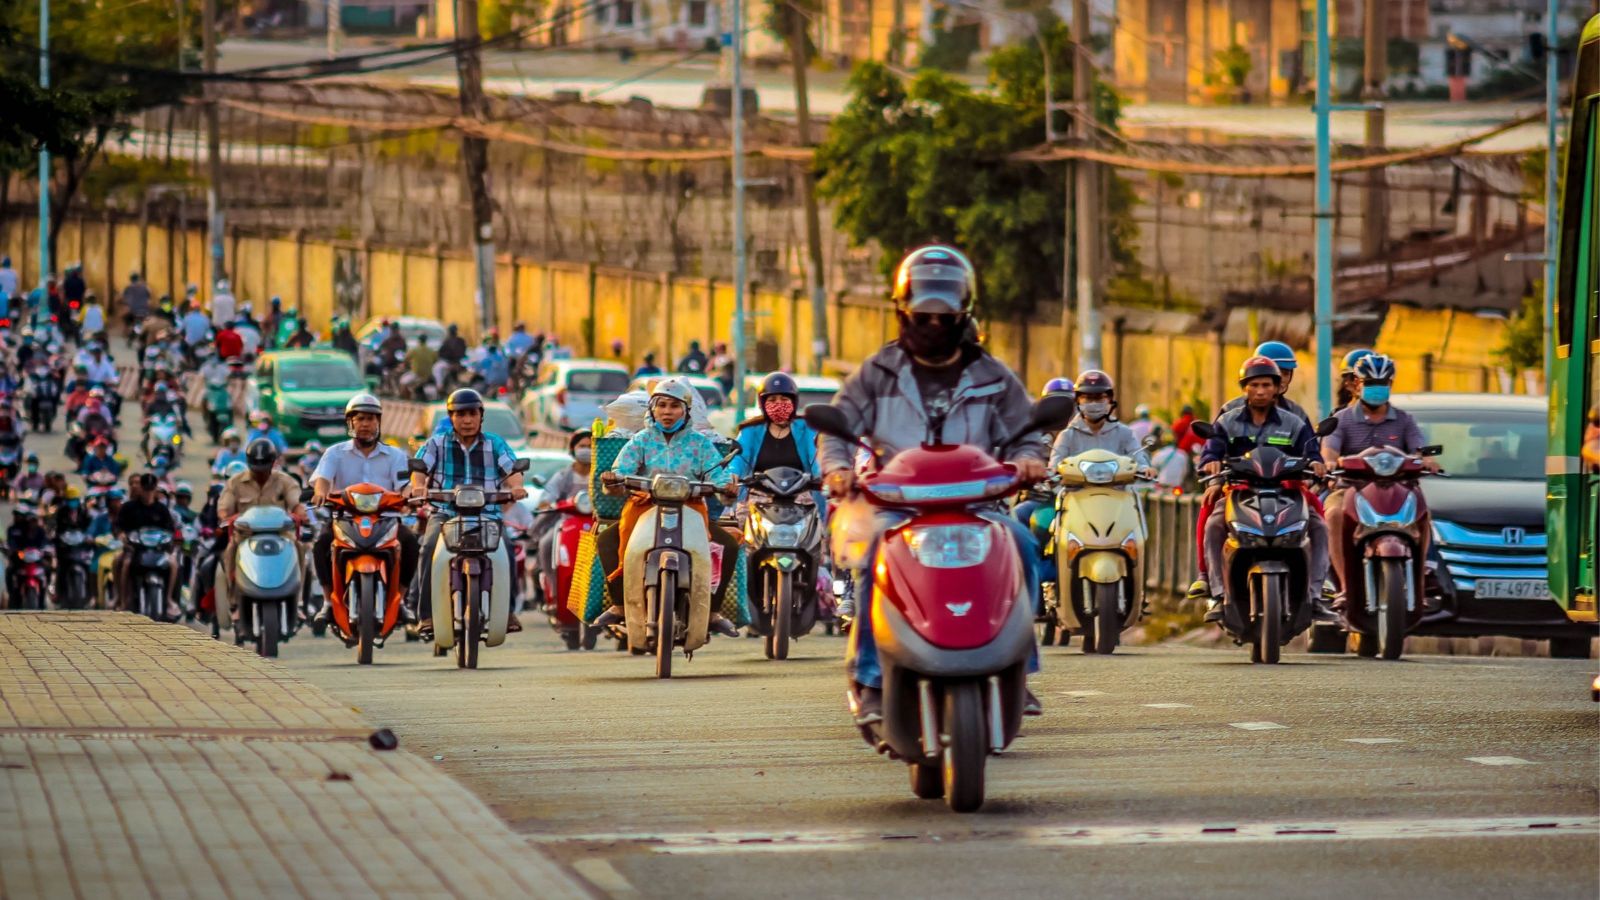 group of people on scooters travelling on road